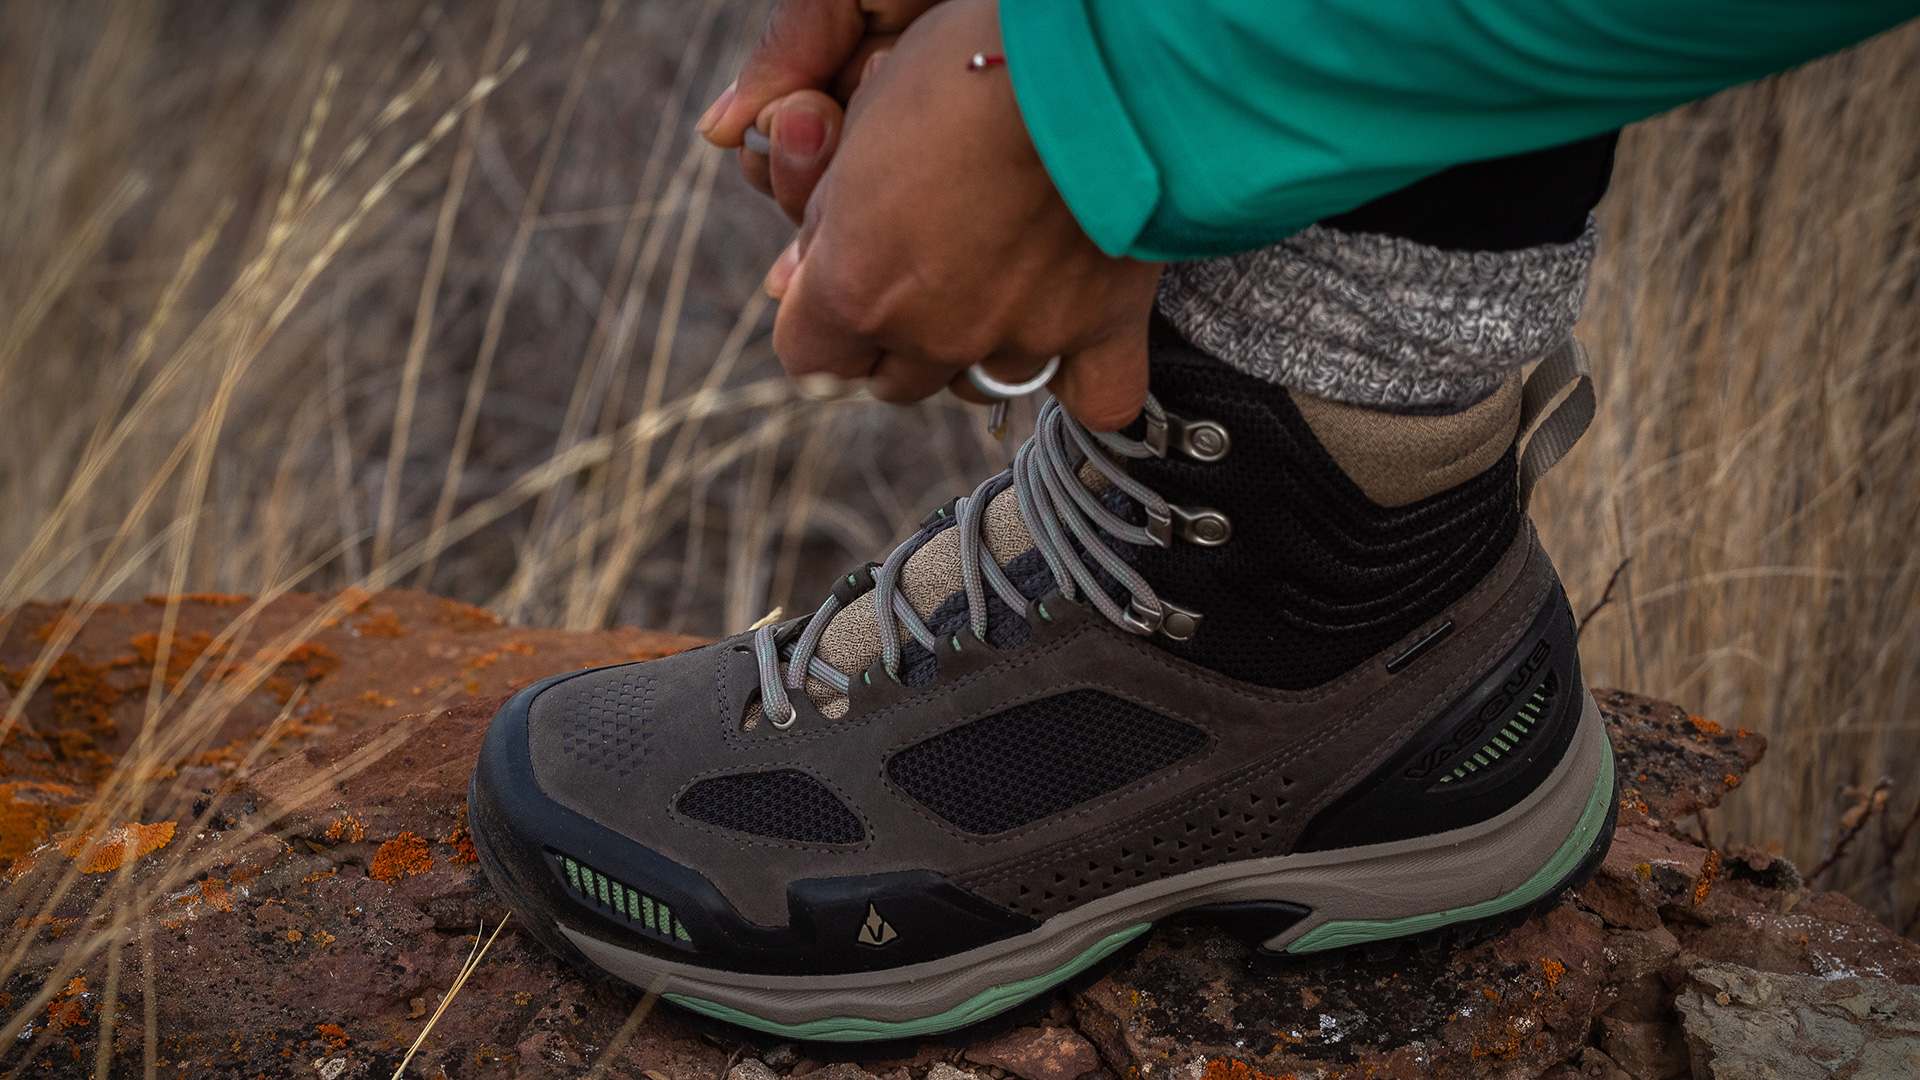 Women's Hiking Shoes at Mountain Designs